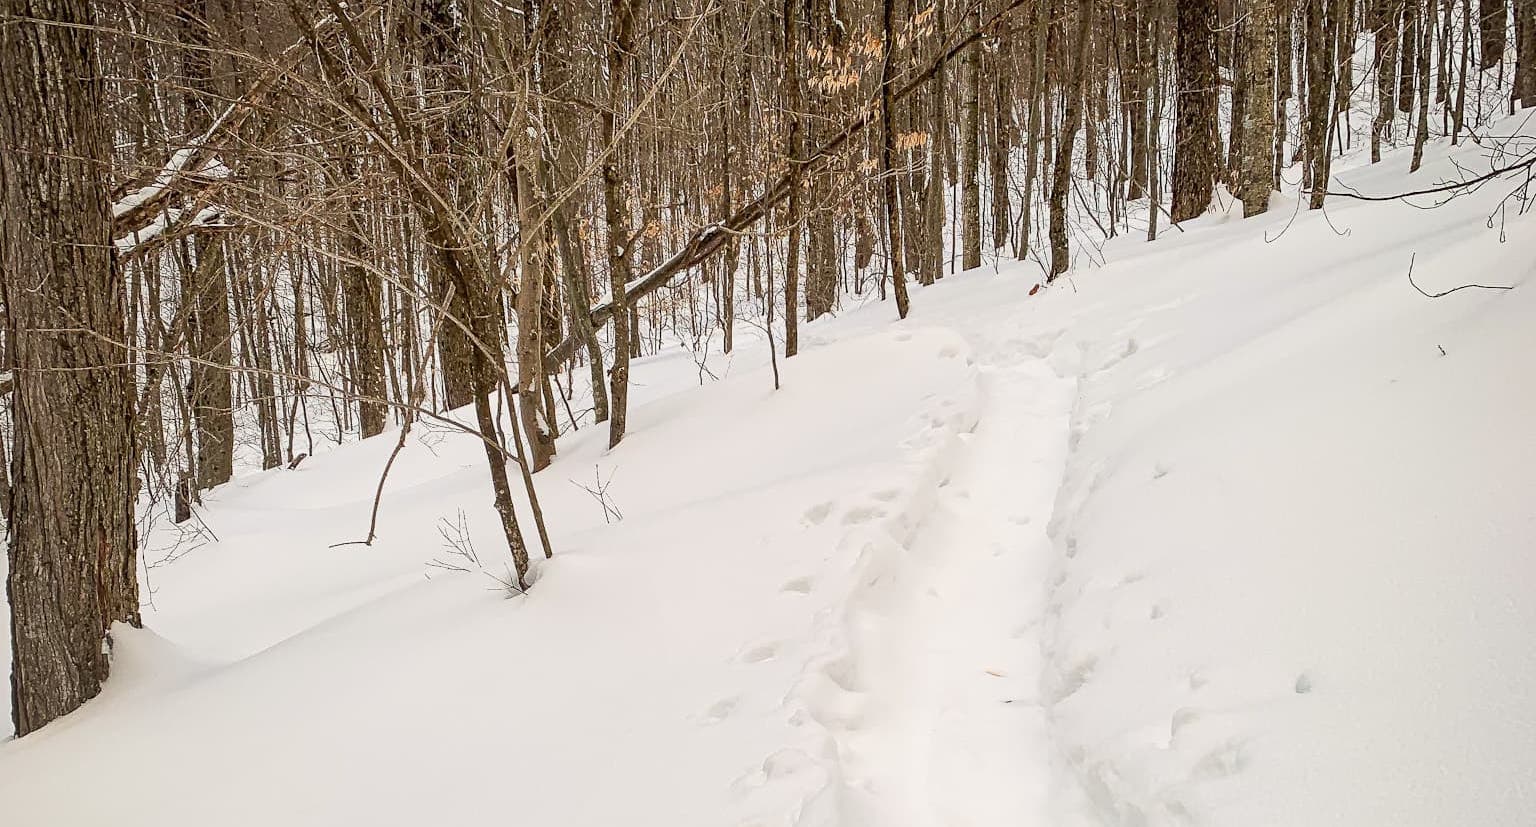 snowshoe trench in snow